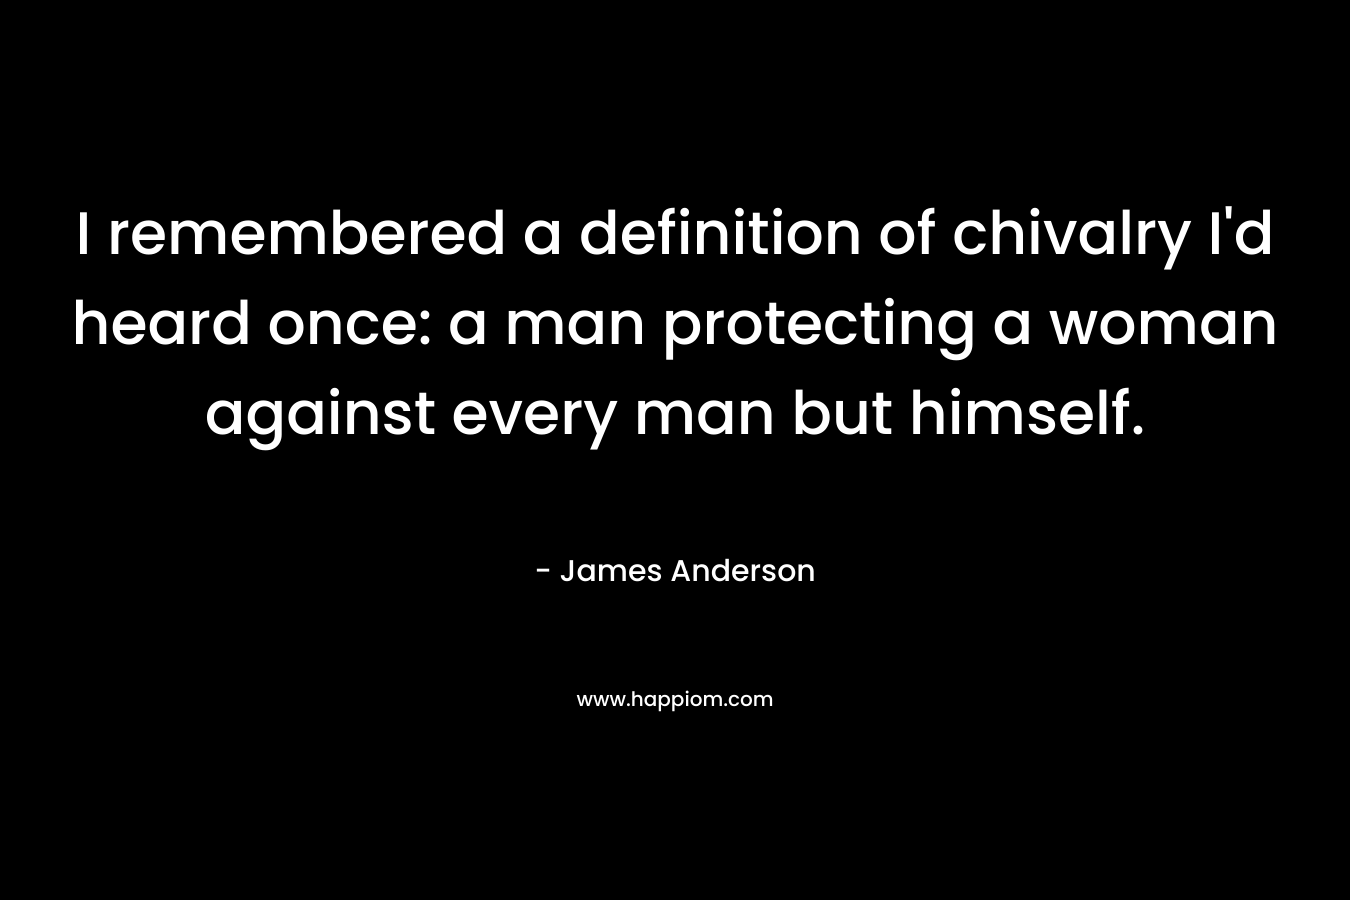 I remembered a definition of chivalry I'd heard once: a man protecting a woman against every man but himself.